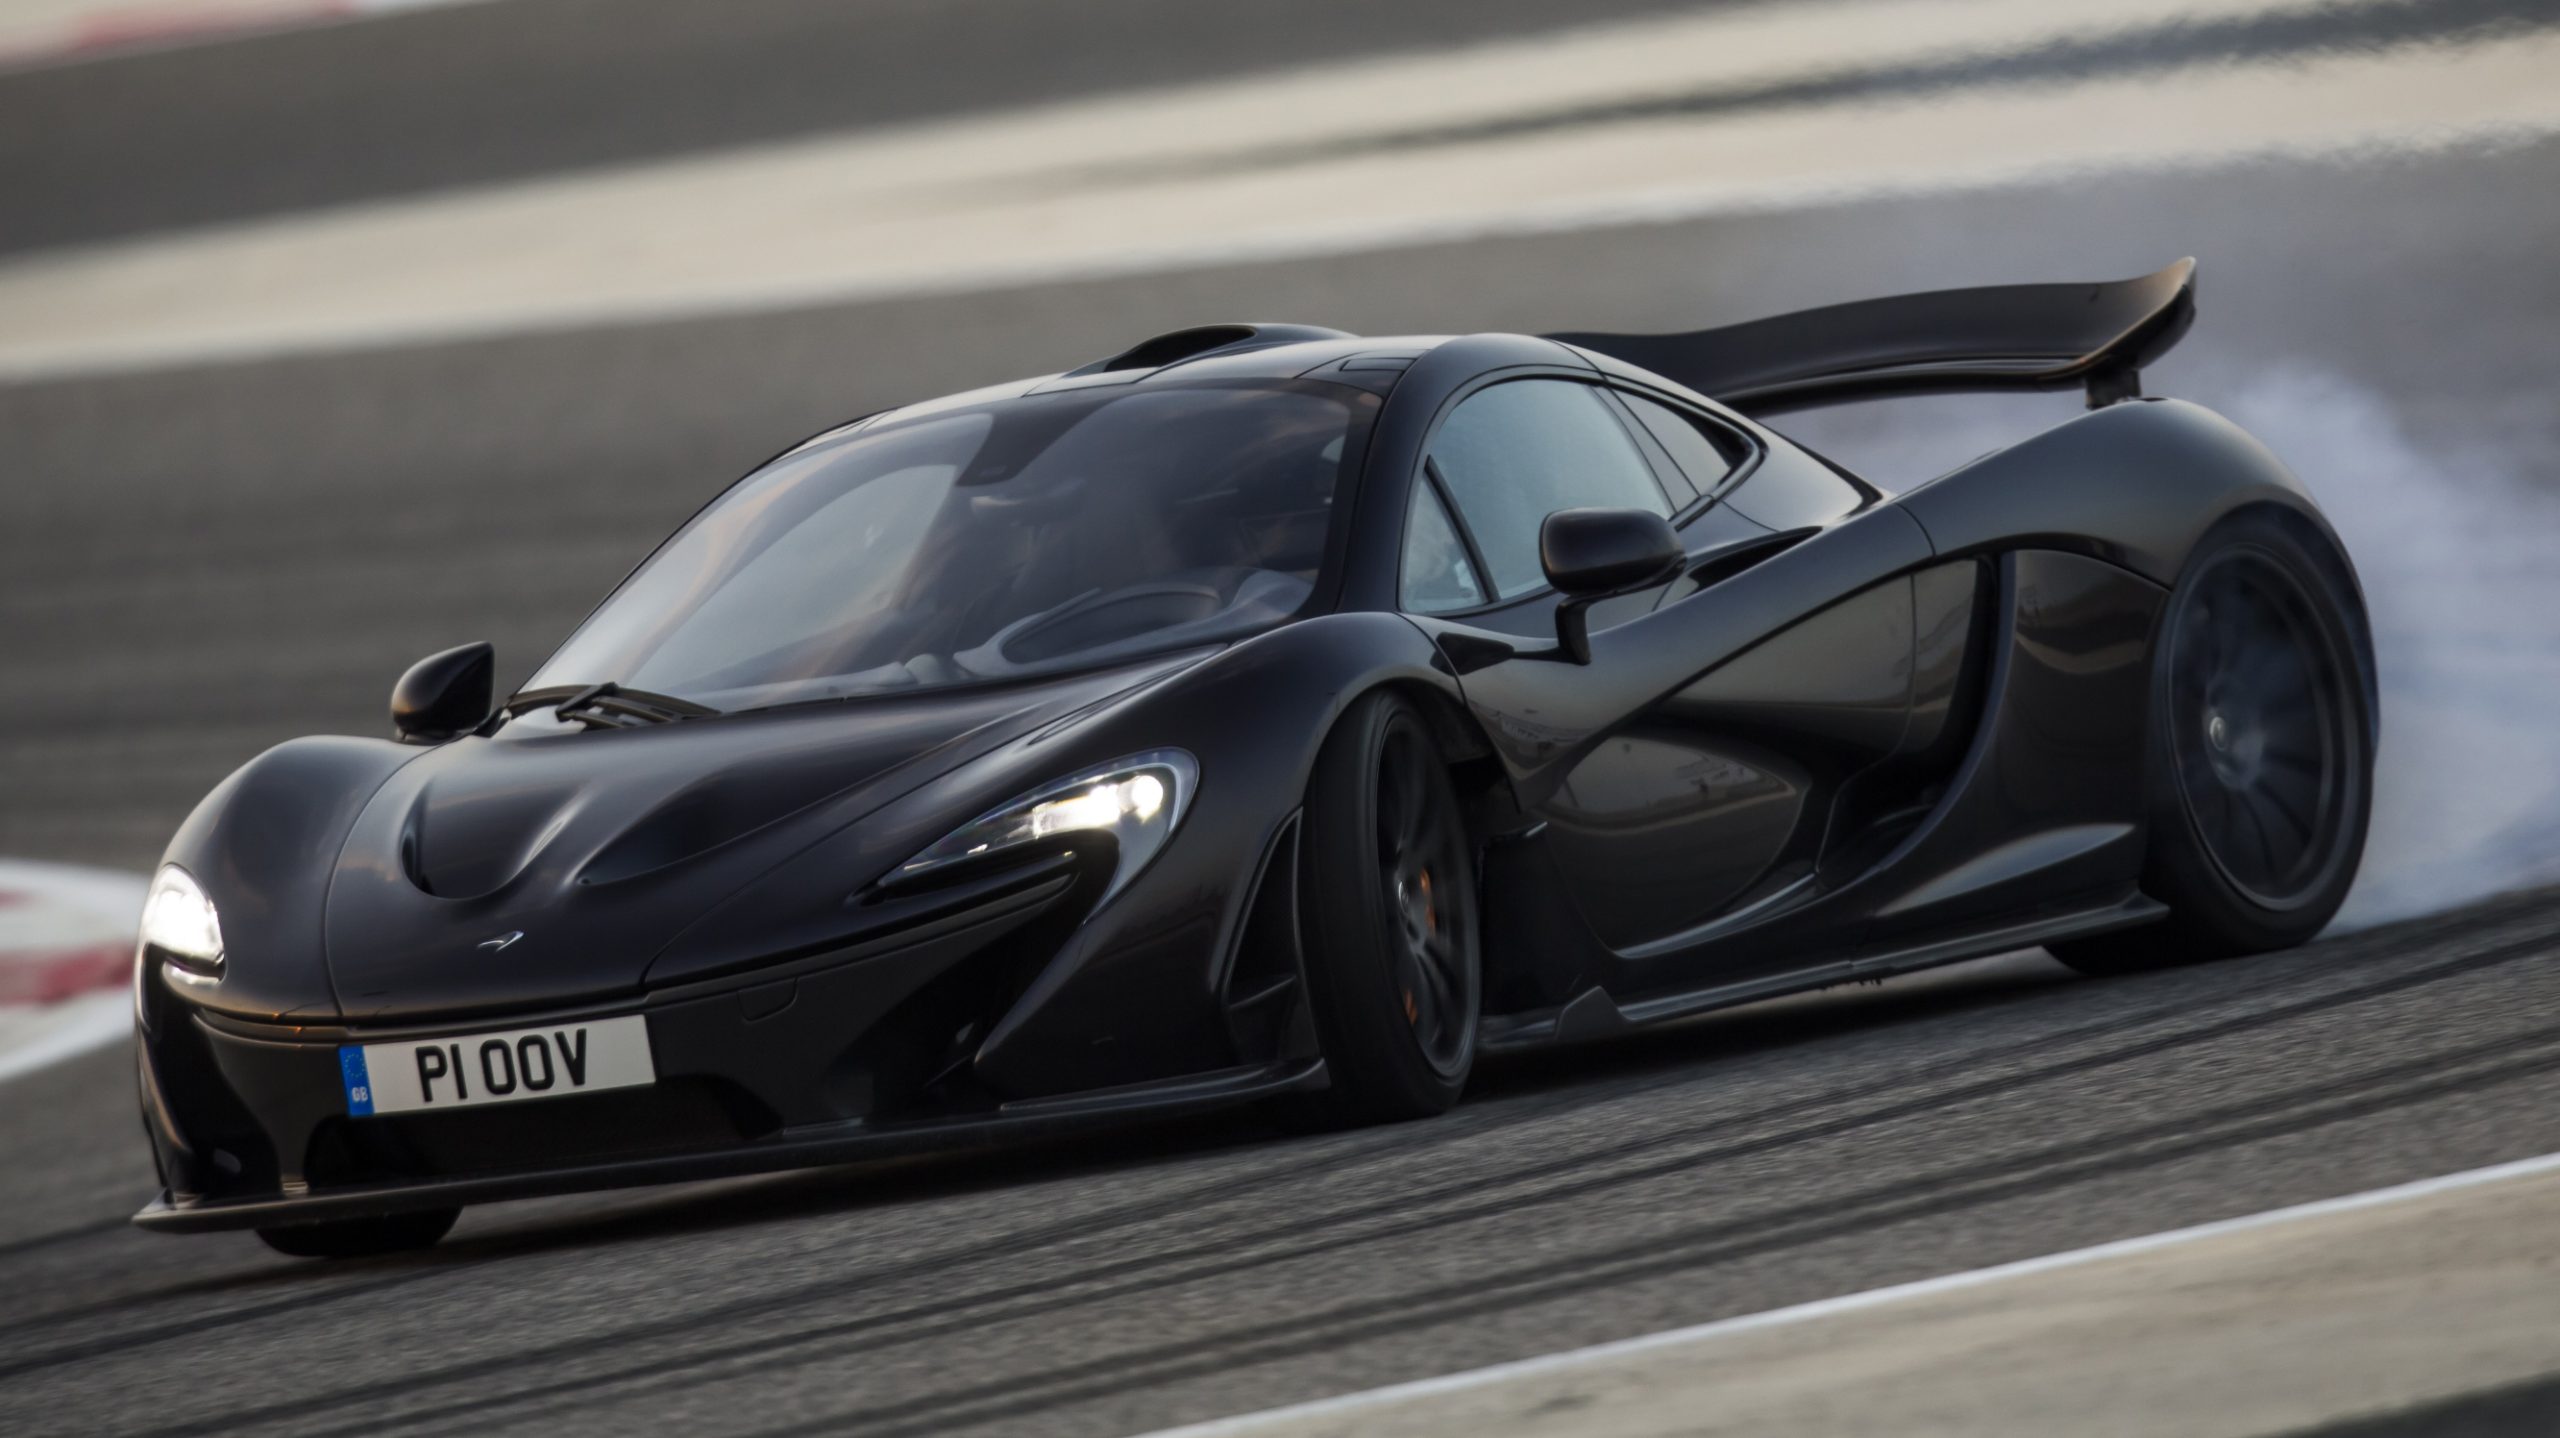 front-angled shot of a black McLaren P1 drifting around a racetrack.